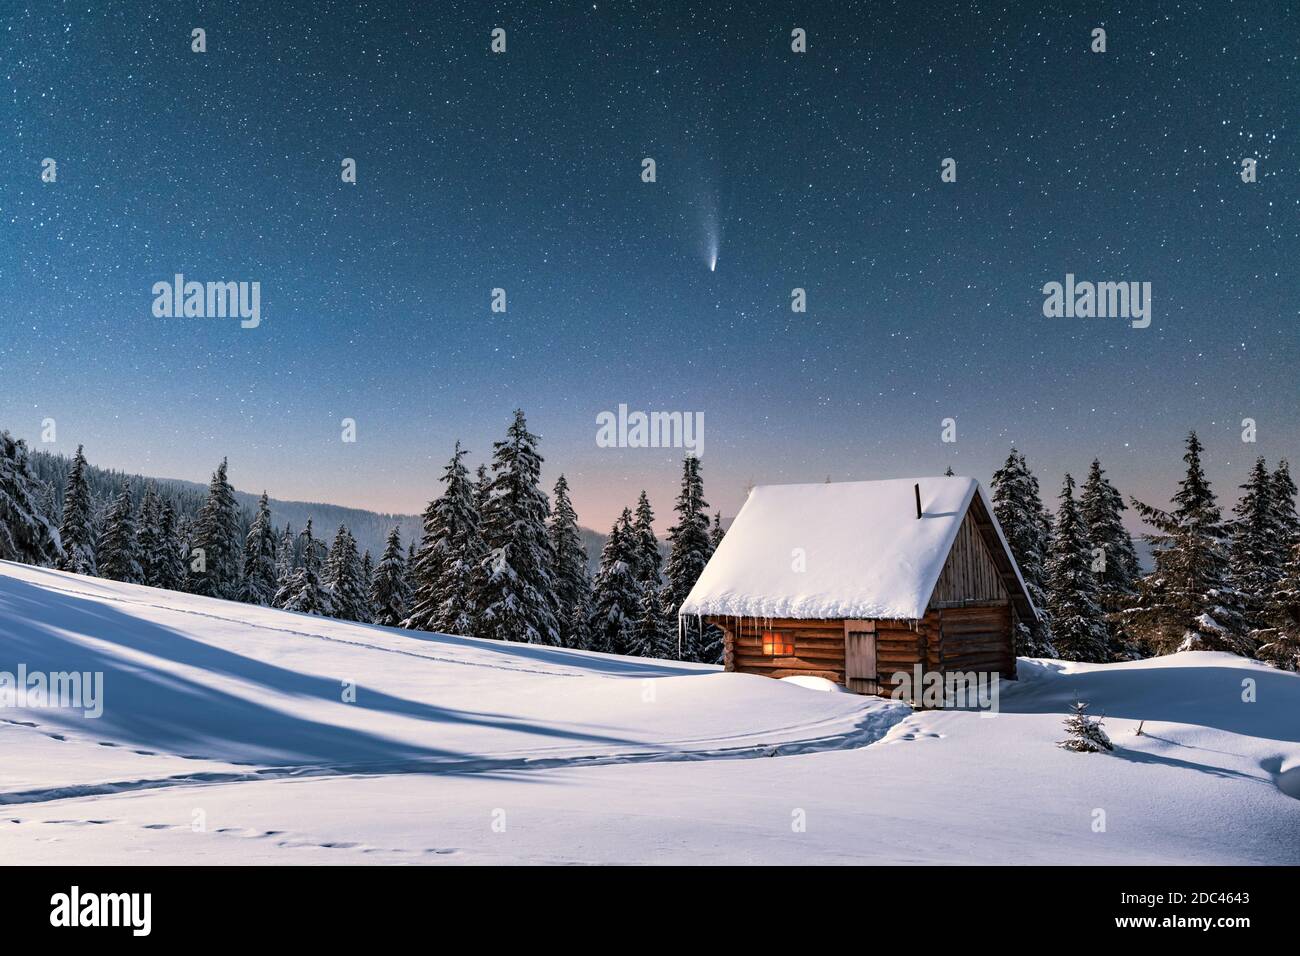 Fantastic winter landscape with wooden house in snowy mountains. Starry sky with comet and snow covered hut. Christmas holiday and winter vacations concept Stock Photo